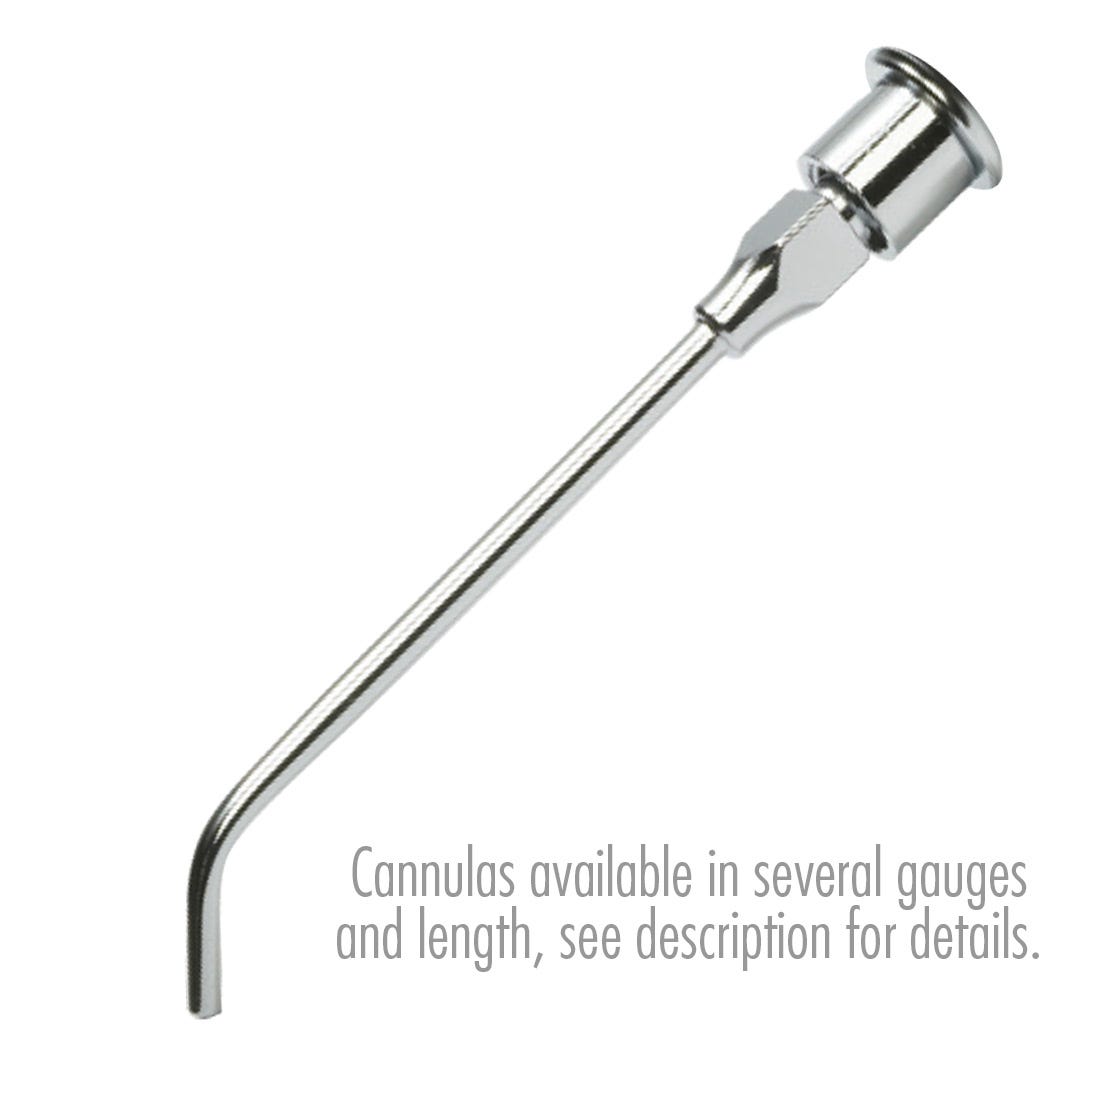 ACE Irrigation Cannula - Stainless Steel 16G x 1-1/4", 45 degree angle